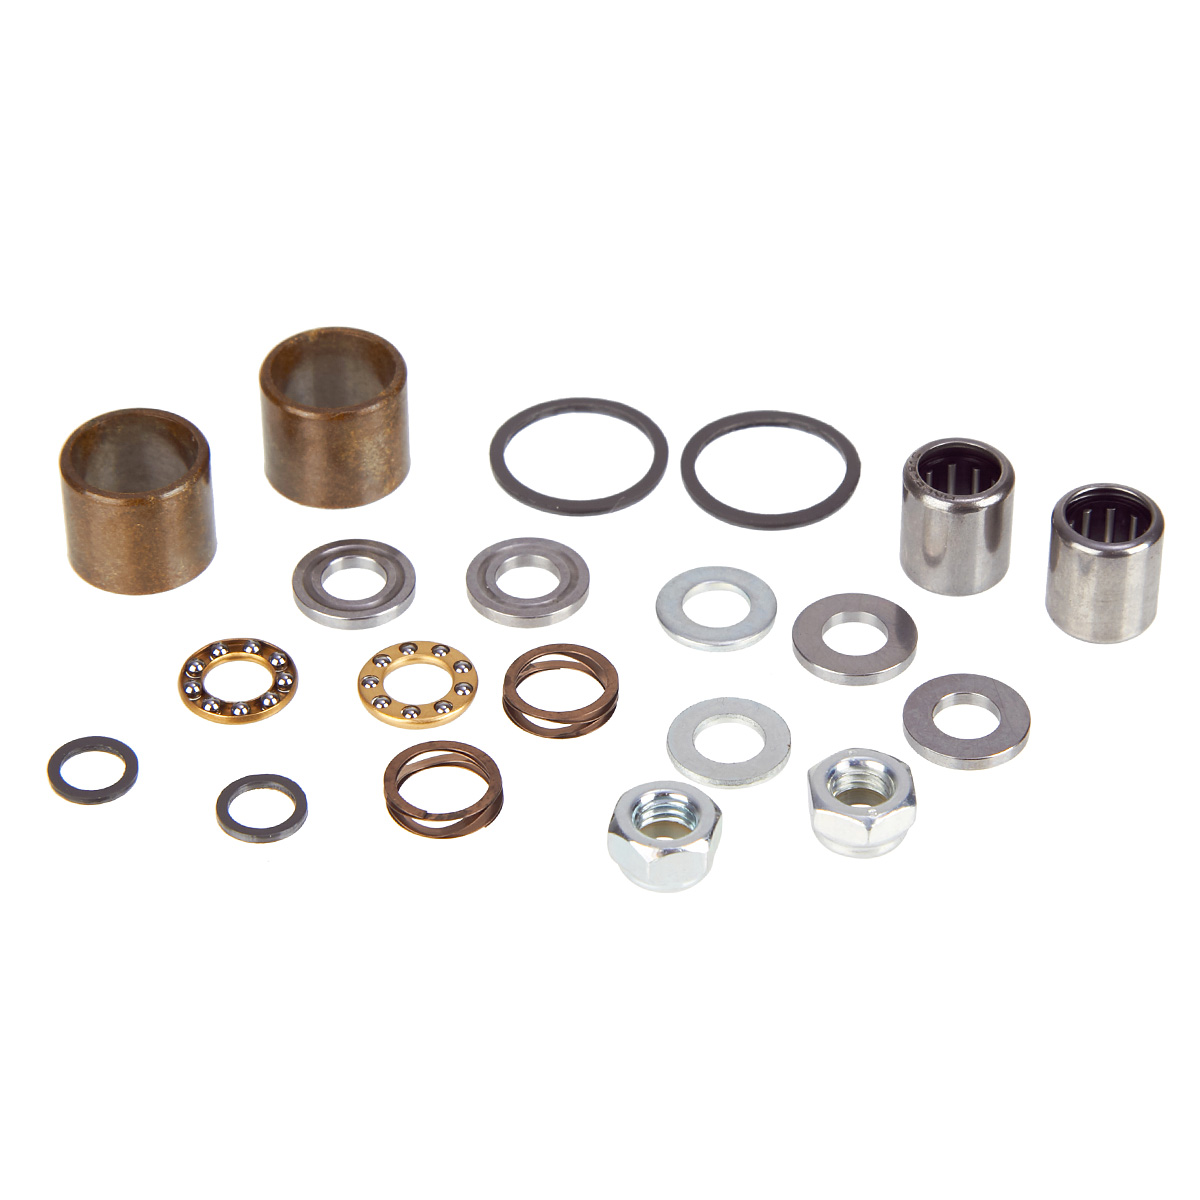 HT Components Pedallager-Kit  für X2/AE06/AE12 Pedalen